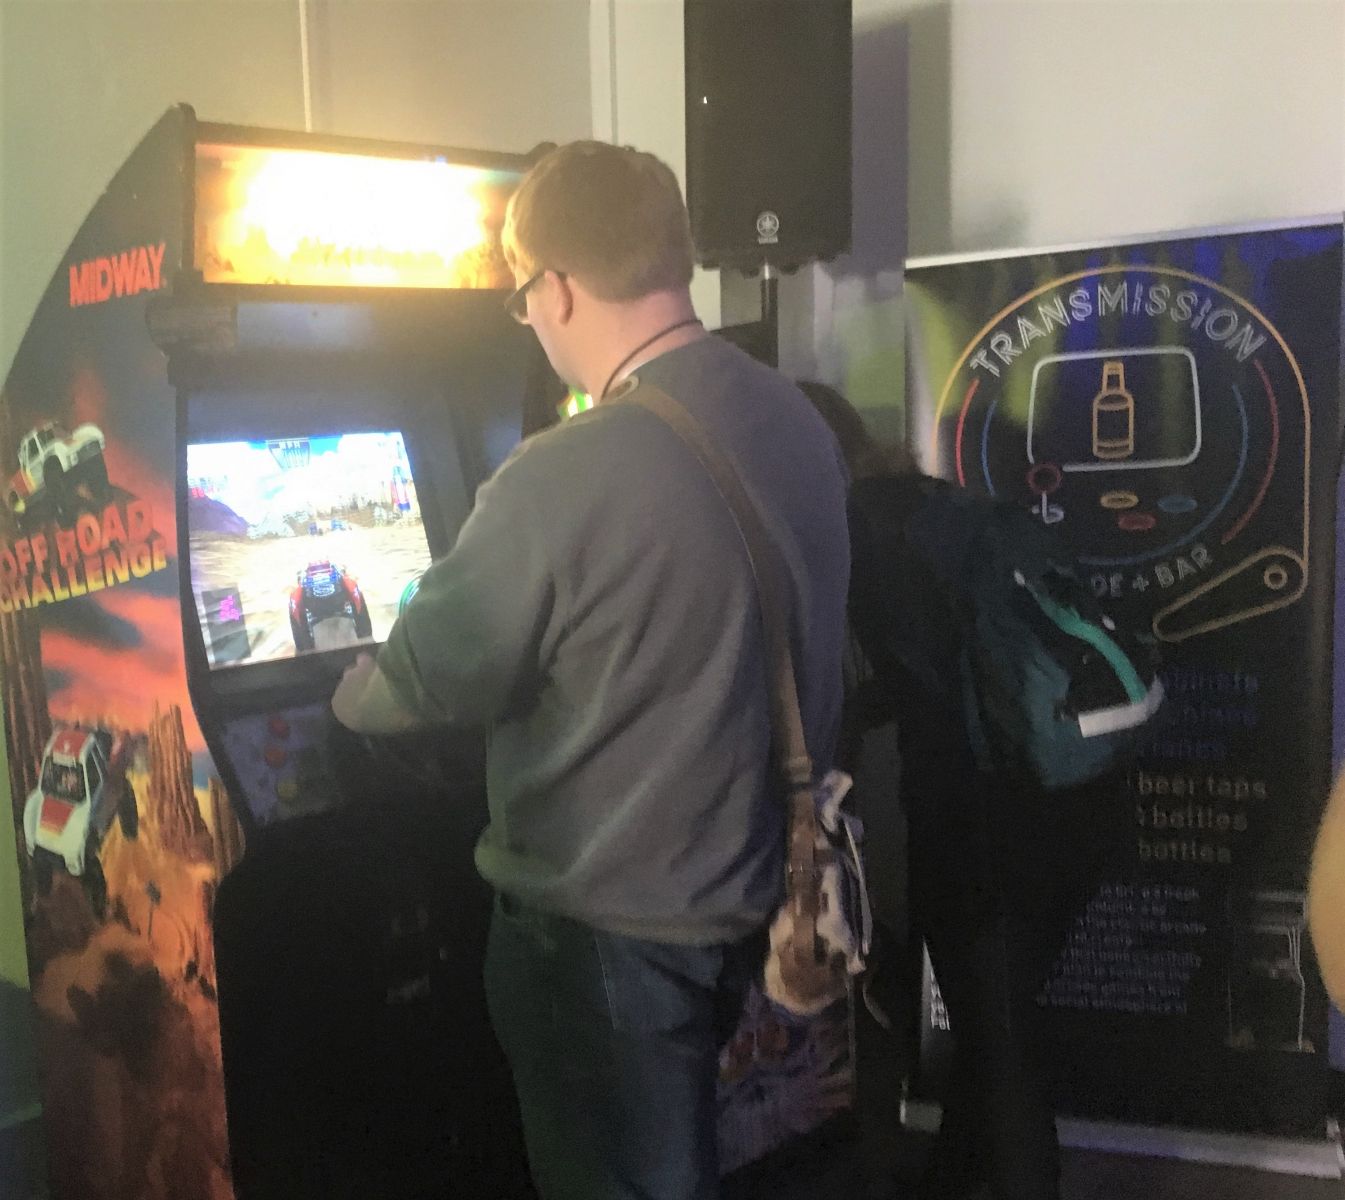 A video game enthusiast gives a game a whirl during a pop-up appearance by arcade bar Transmission earlier this year in downtown Columbia. (Photo/Melinda Waldrop)